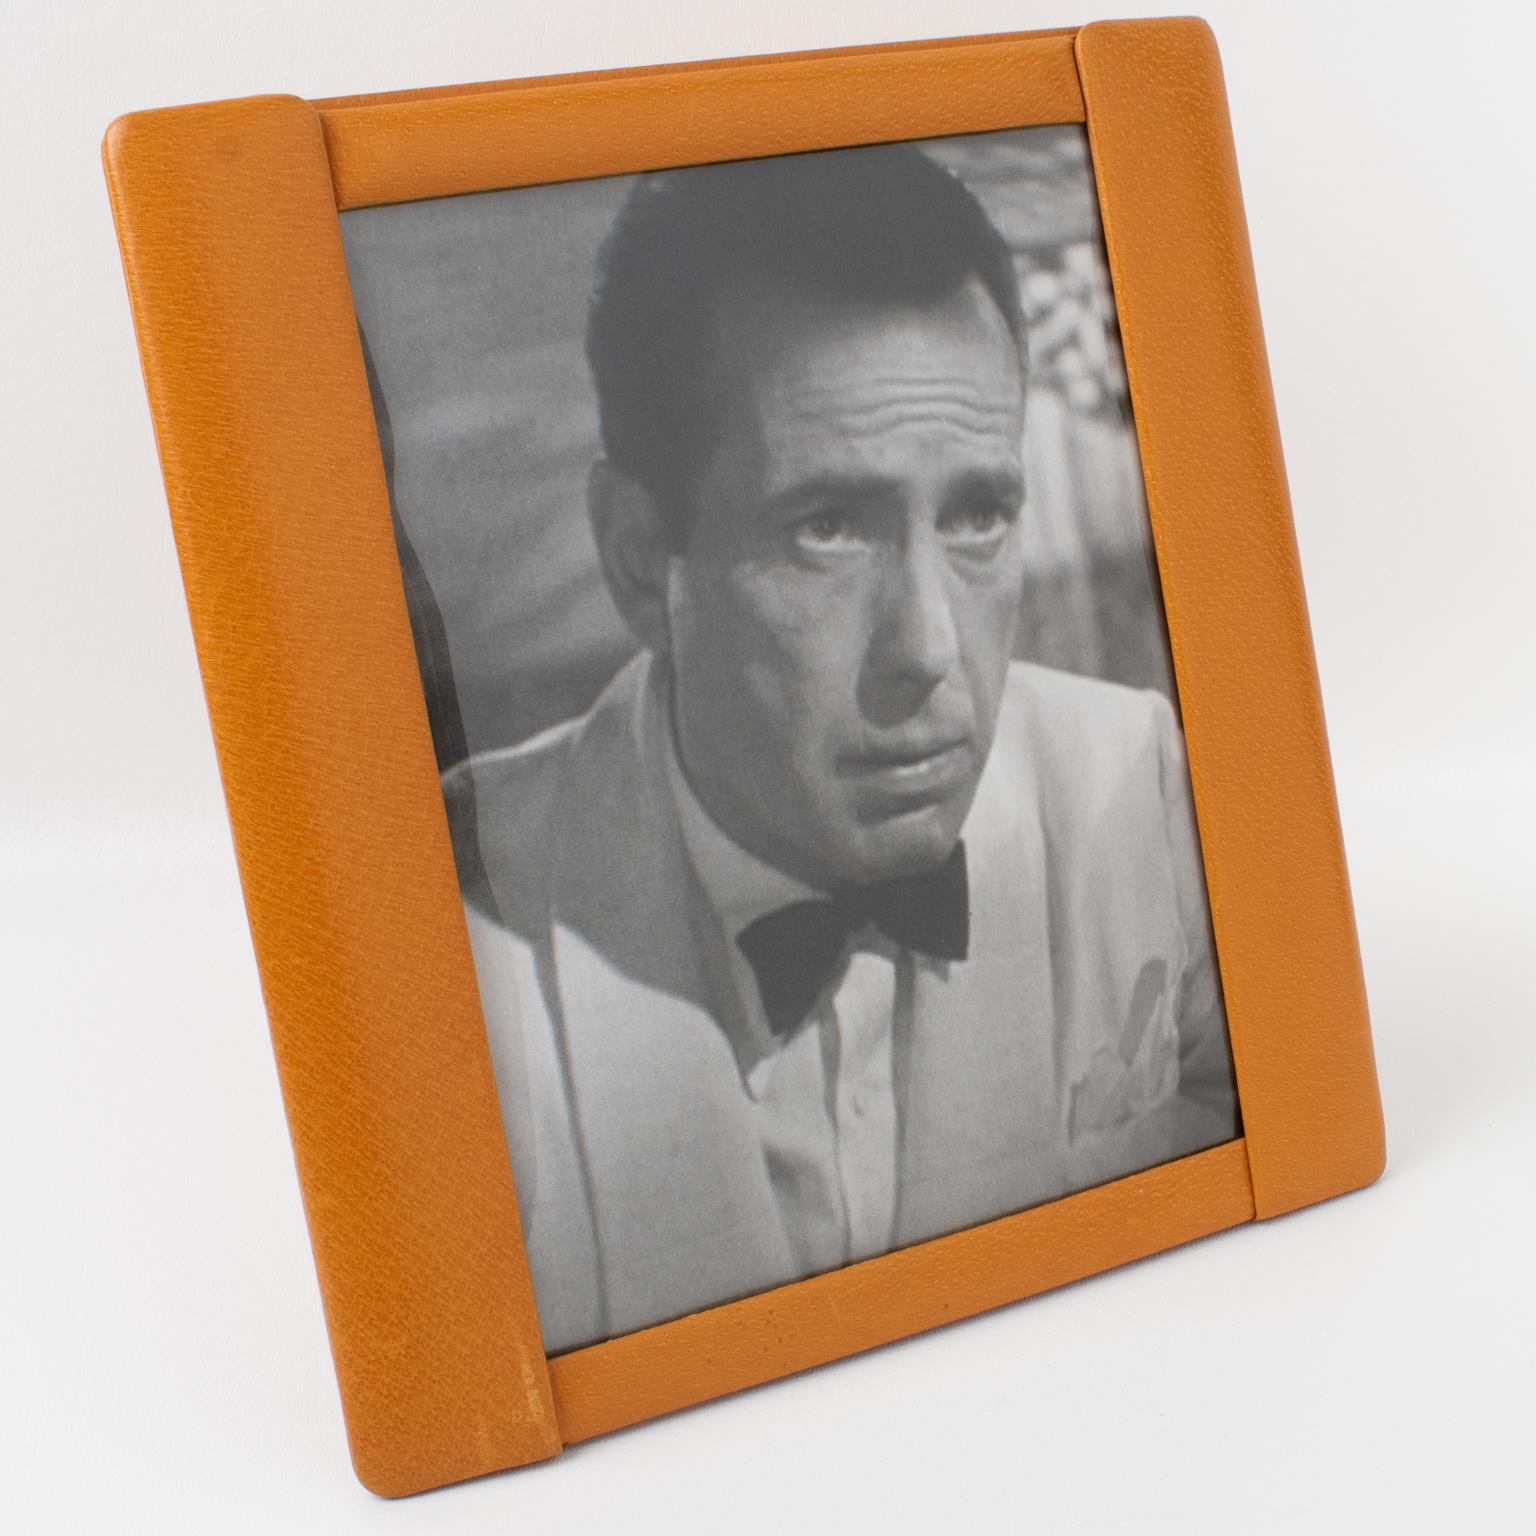 This stunning 1940s French Art Deco modernist leather picture photo frame features fine-grain calf leather in cognac color with a pattern. The easel and back are in the same calf leather, and a rhodoid protection is on the front to secure the